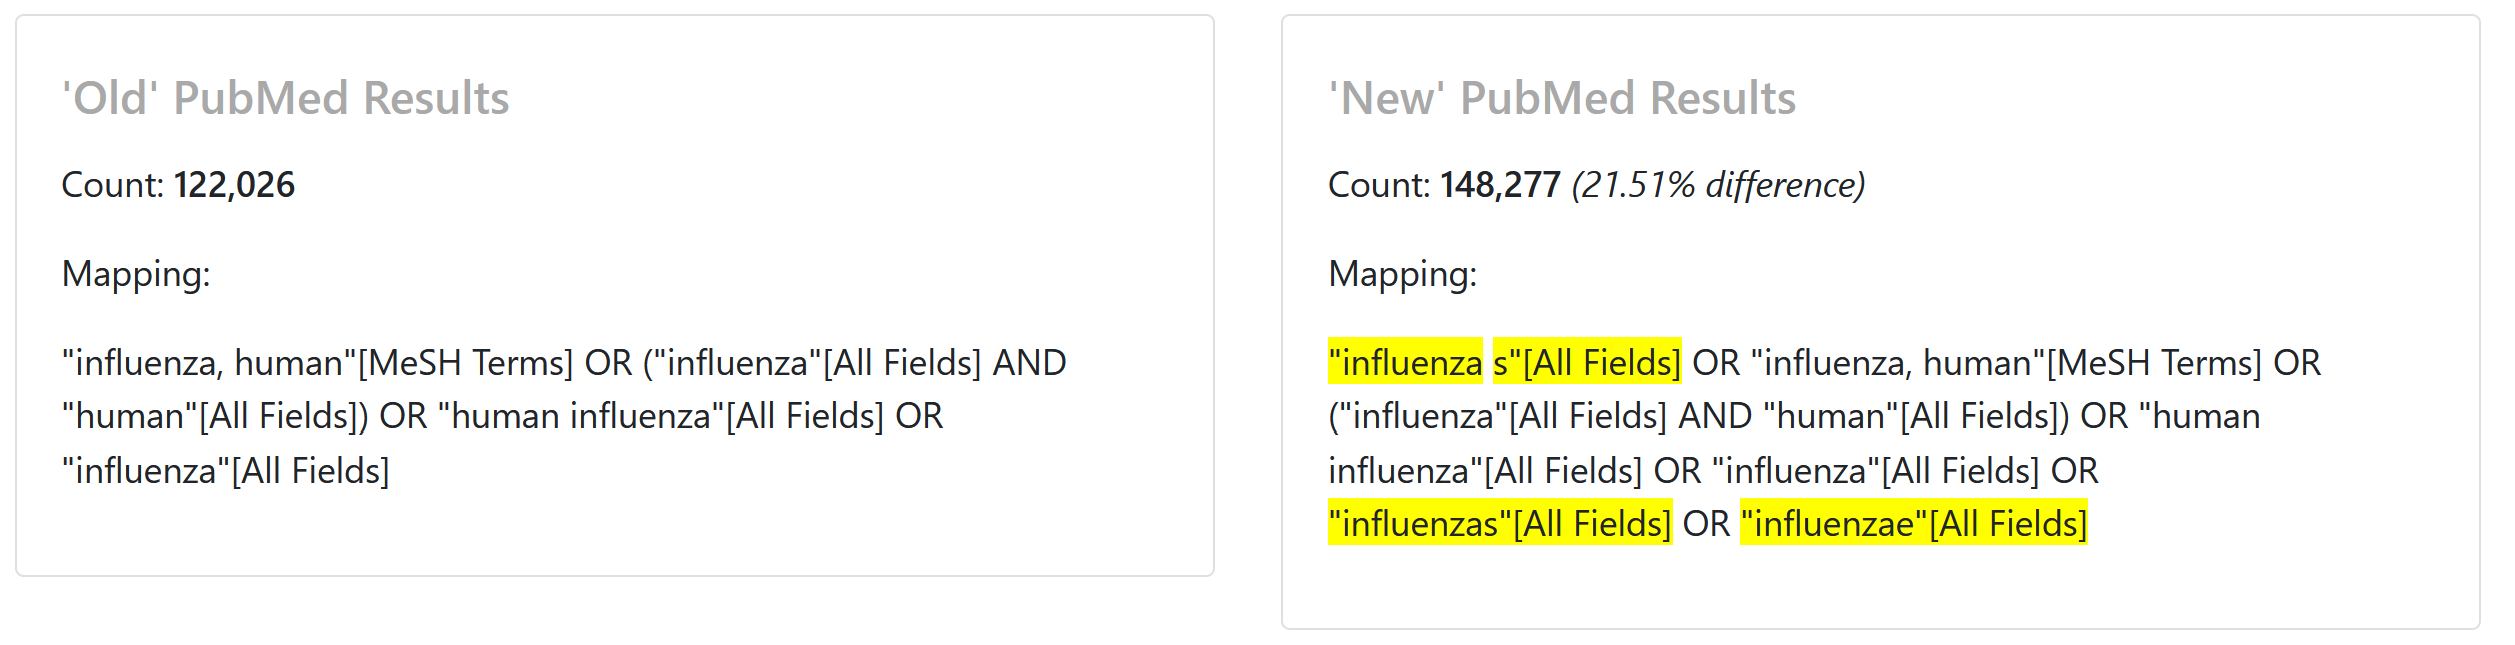 Old and new mapping for 'Influenza'